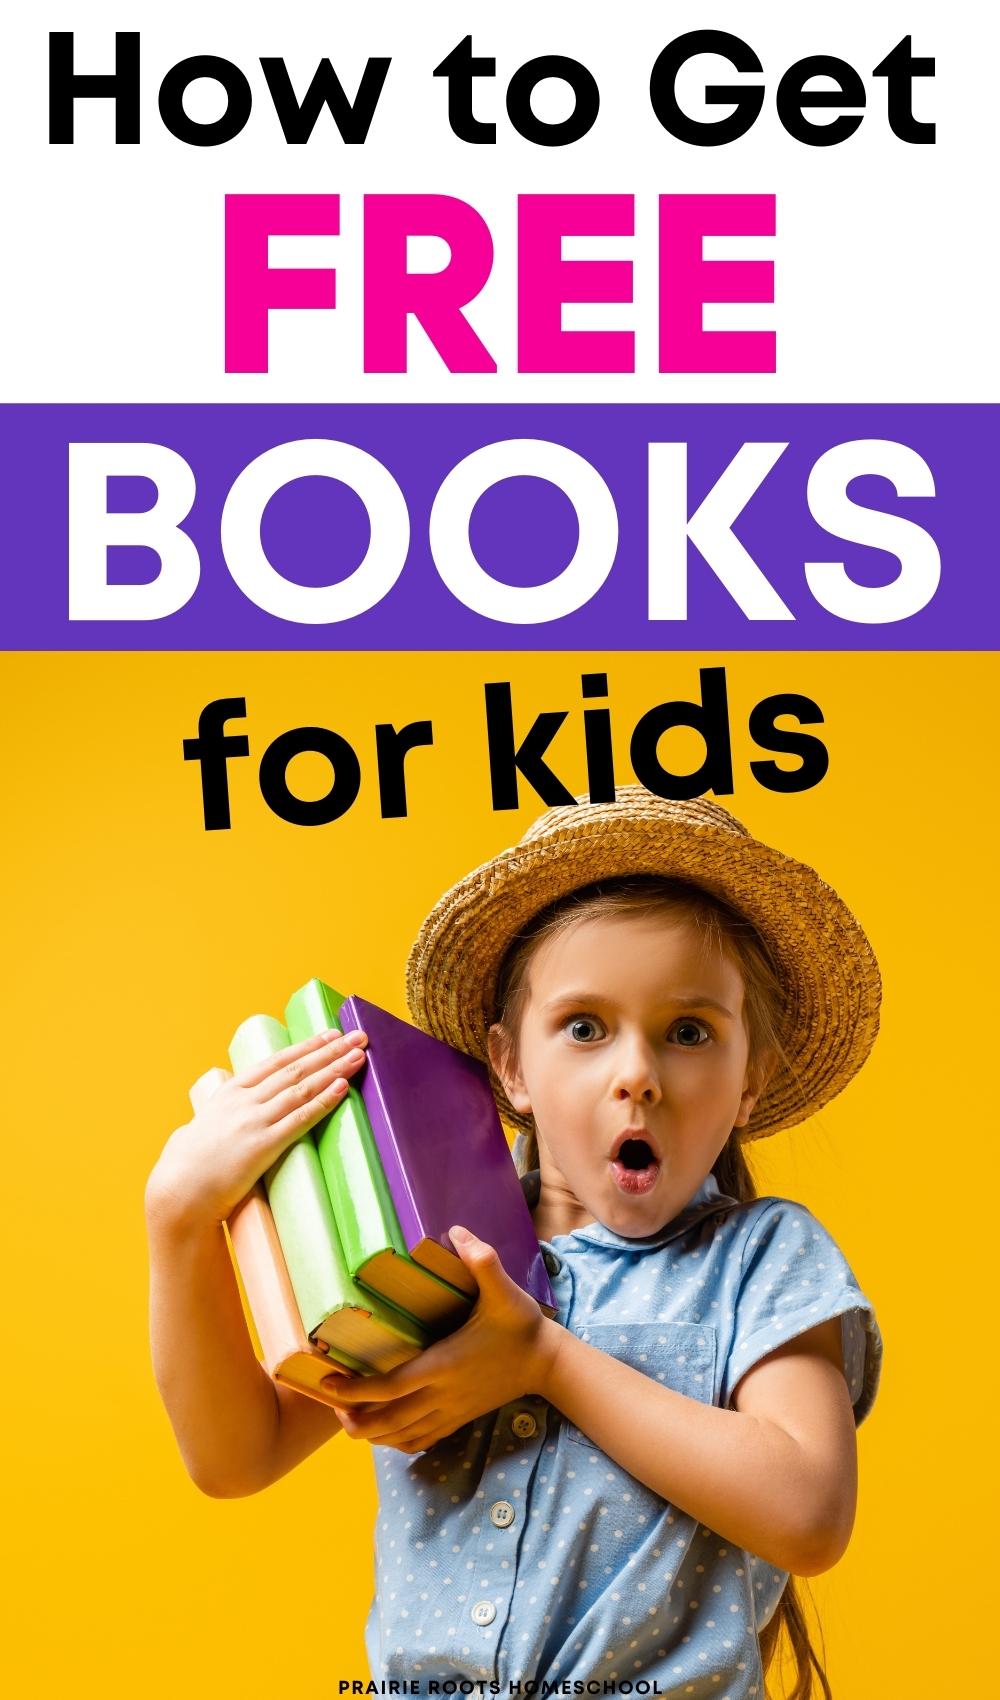 How to Get Free Books for Kids by Mail (And More!) - Prairie Roots